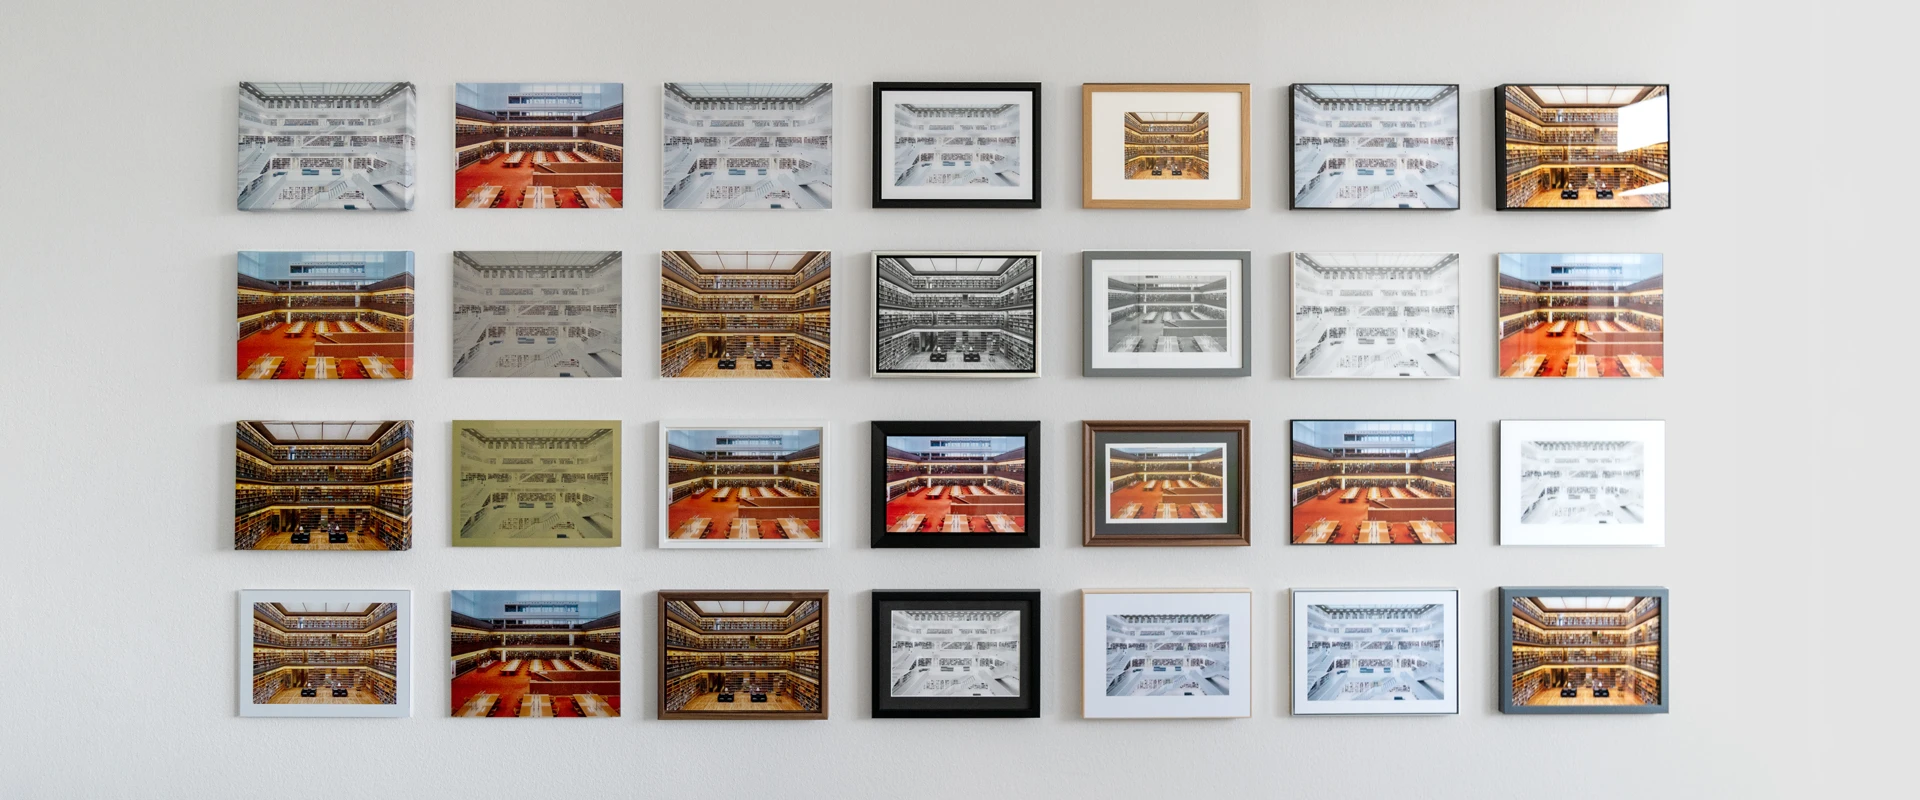 An example topic for a digital appointment are the products and materials. The image shows some of our products and frames hanging structured in rows on the wall.